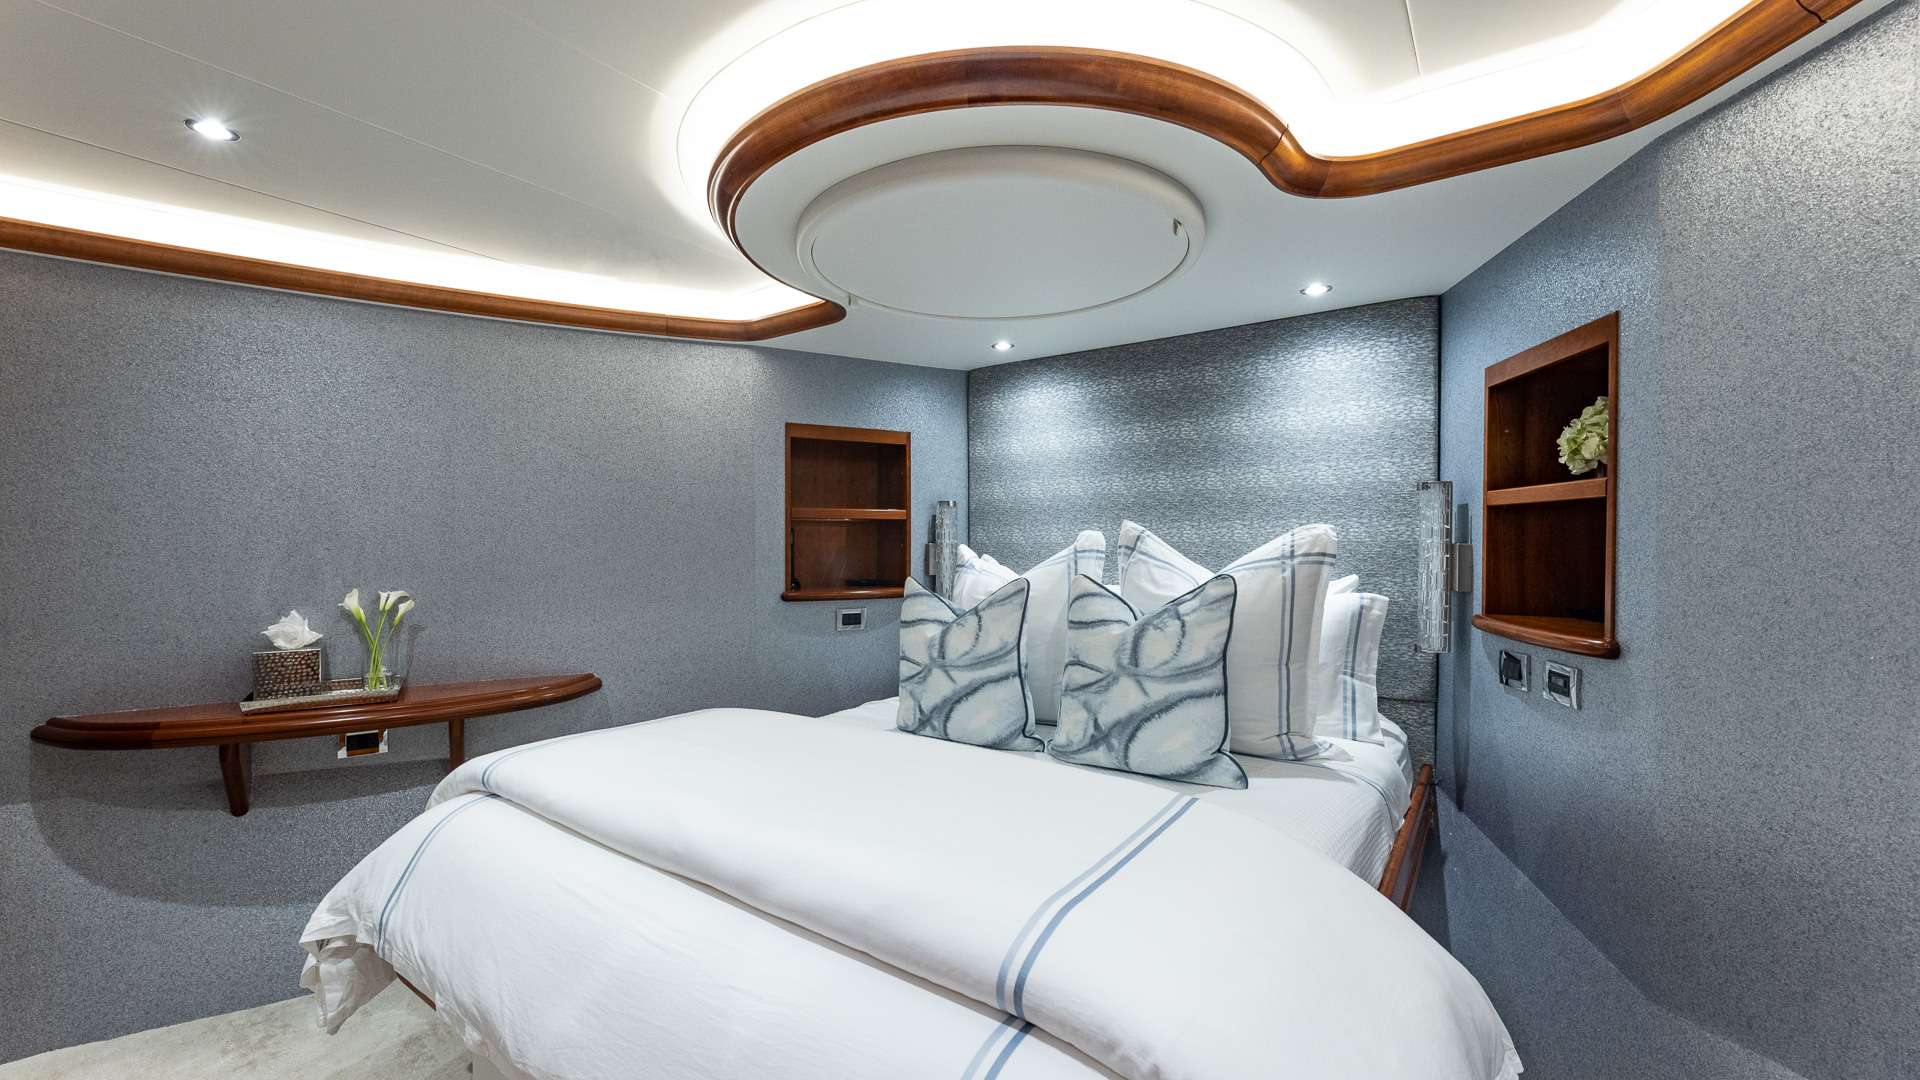 NO SHORTCUTS Yacht Charter - VIP Queen Stateroom